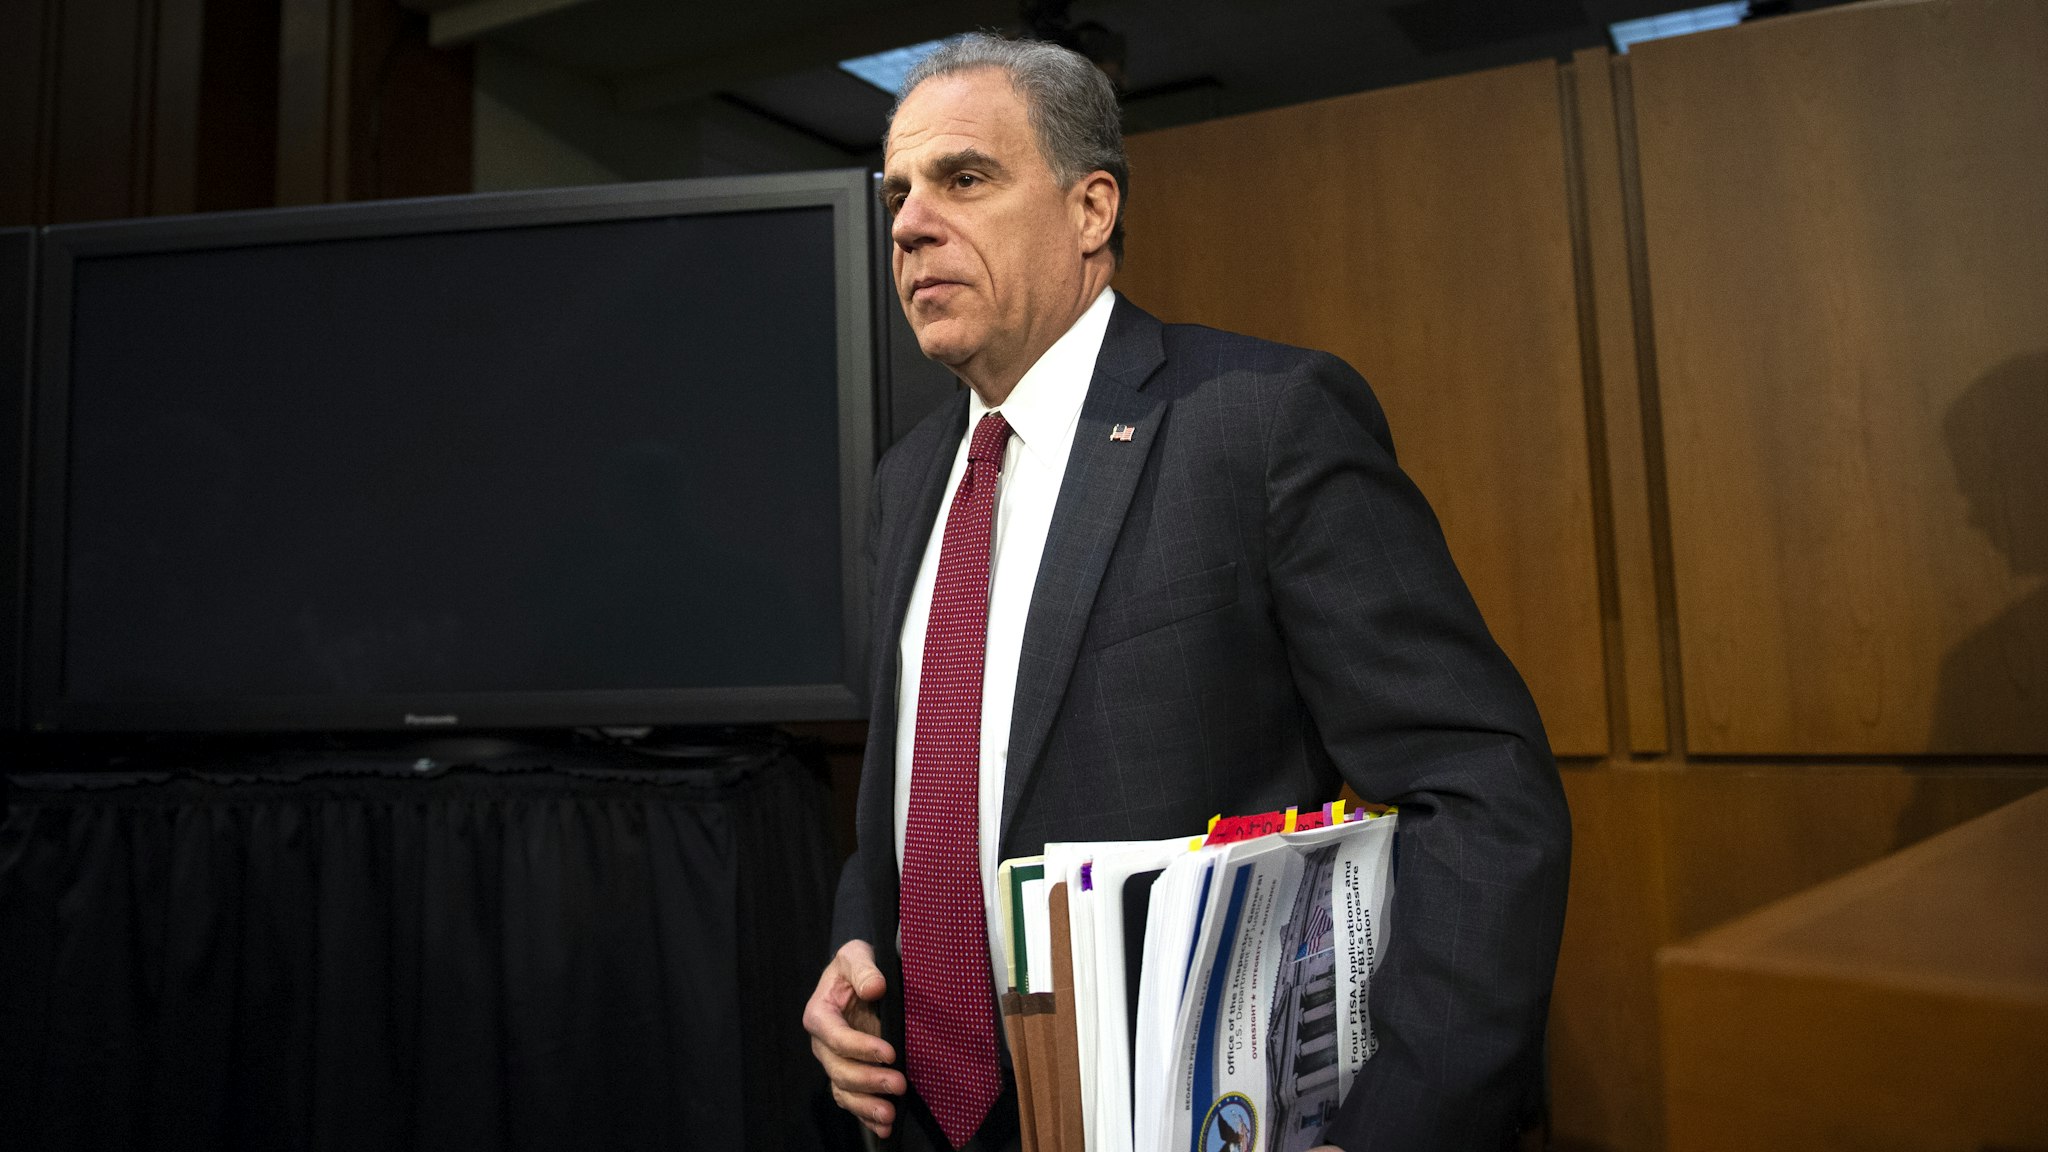 UNITED STATES - DECEMBER 11: Justice Department Inspector General Michael Horowitz arrives to testify before the Senate Judiciary Committee for a hearing on "Examining the Inspector General's report on alleged abuses of the Foreign Intelligence Surveillance Act (FISA) on Wednesday Dec. 11, 2019.